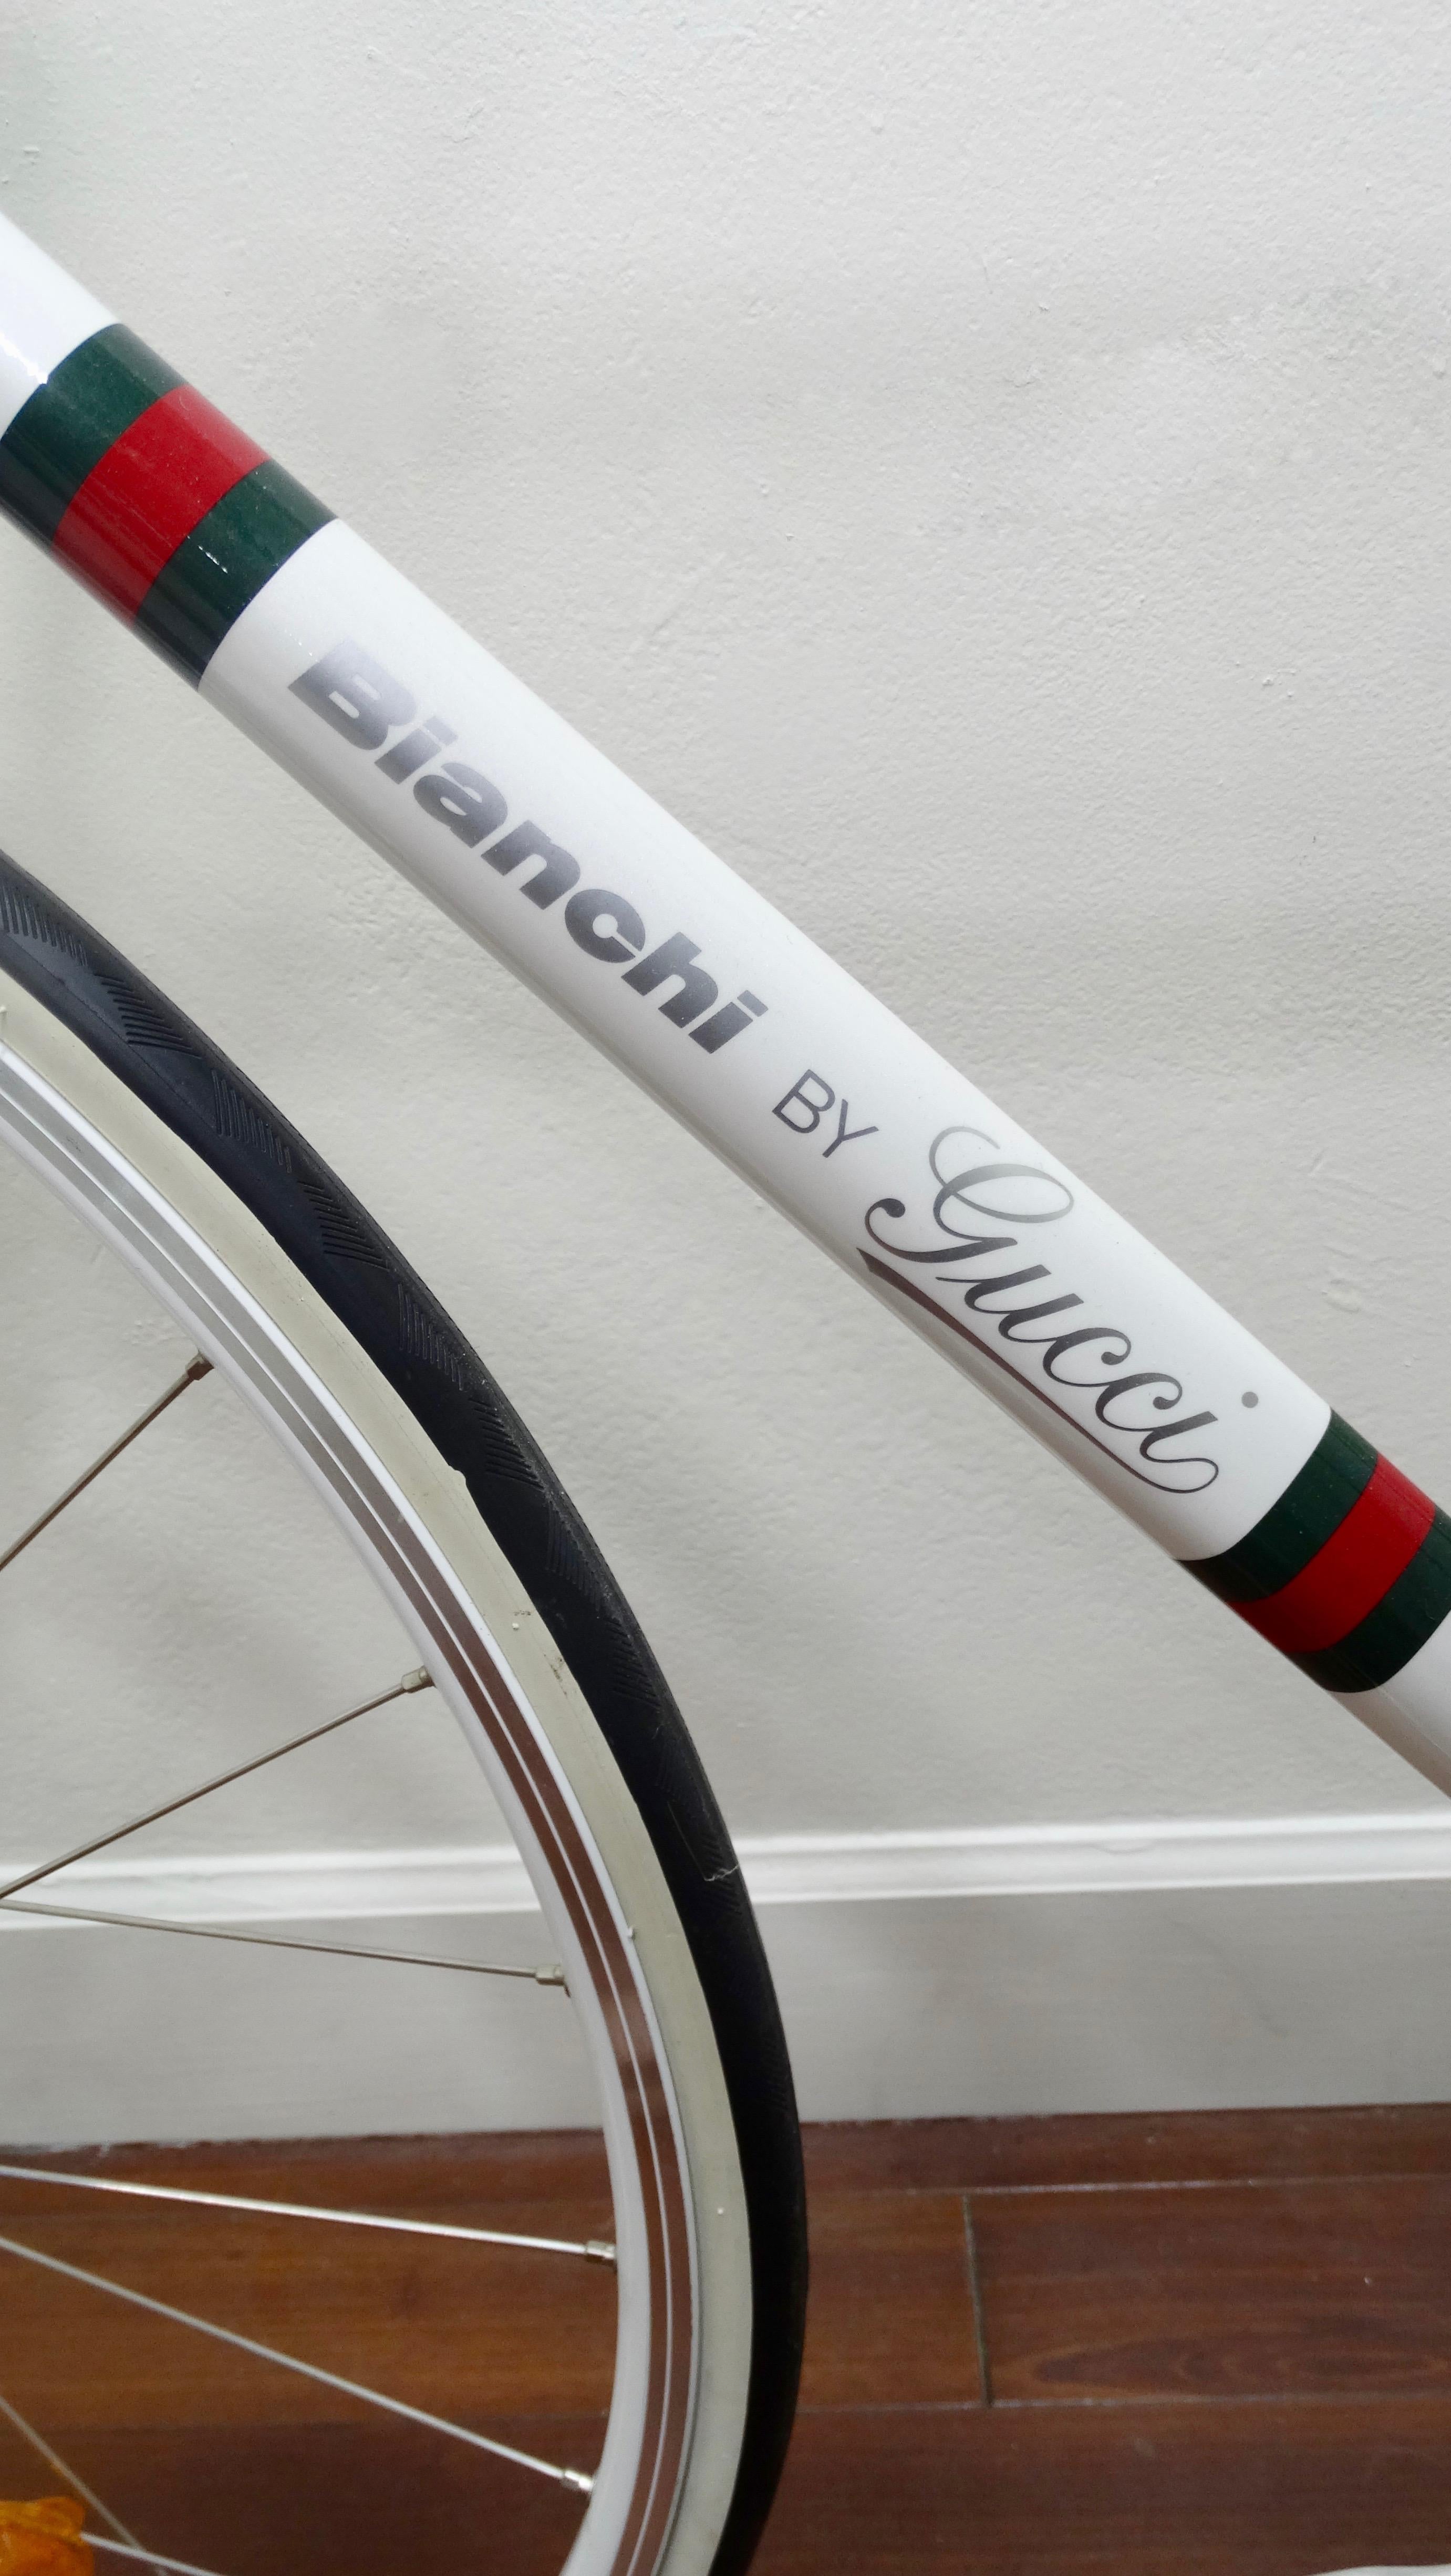 Ride in style or elevate your interior space with this amazing Gucci x Bianchi bike! This 2011 collaboration unveiled the exclusive Bianchi by Gucci bicycle designed by Gucci Creative Director at the time, Frida Giannini. The Bianchi by Gucci bike